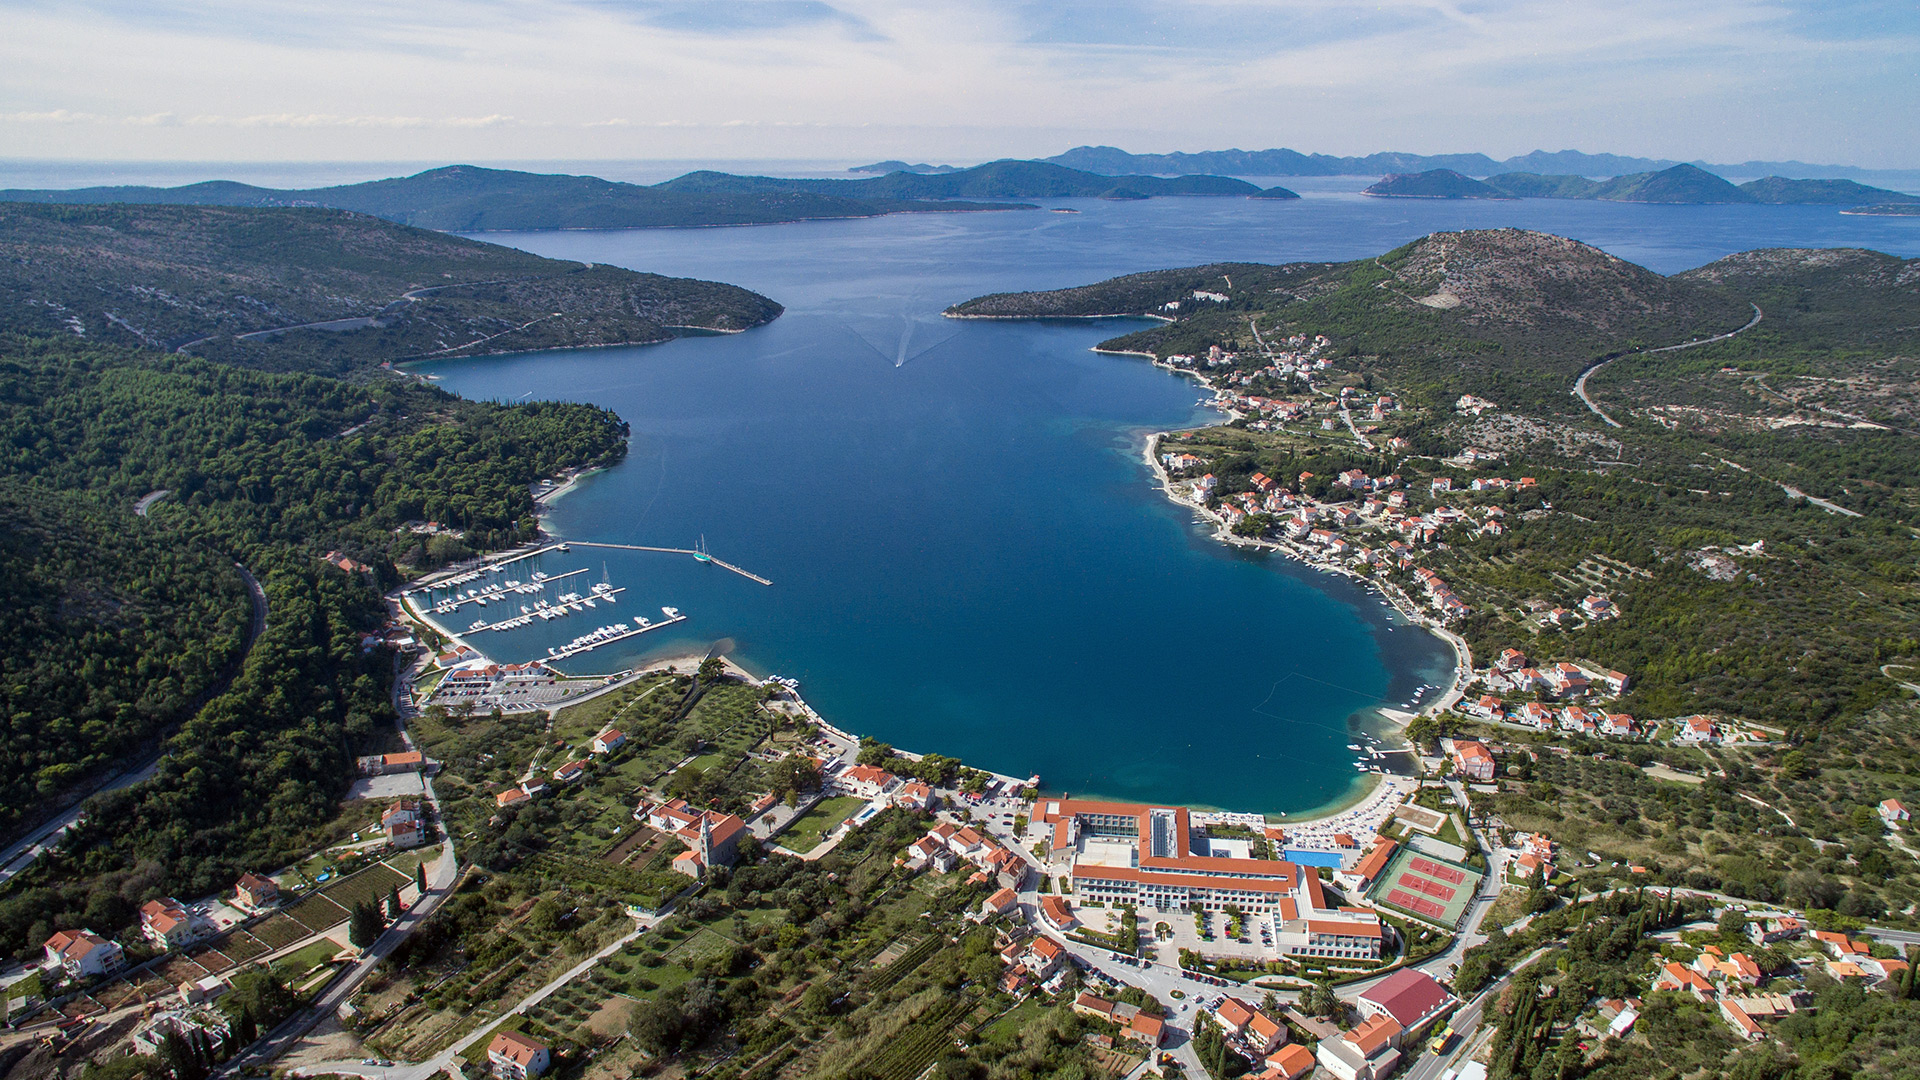 Admiral Grand hotel on the shore of the bay, Slano, Croatia - Adriatic sailing routes of SimpleSail